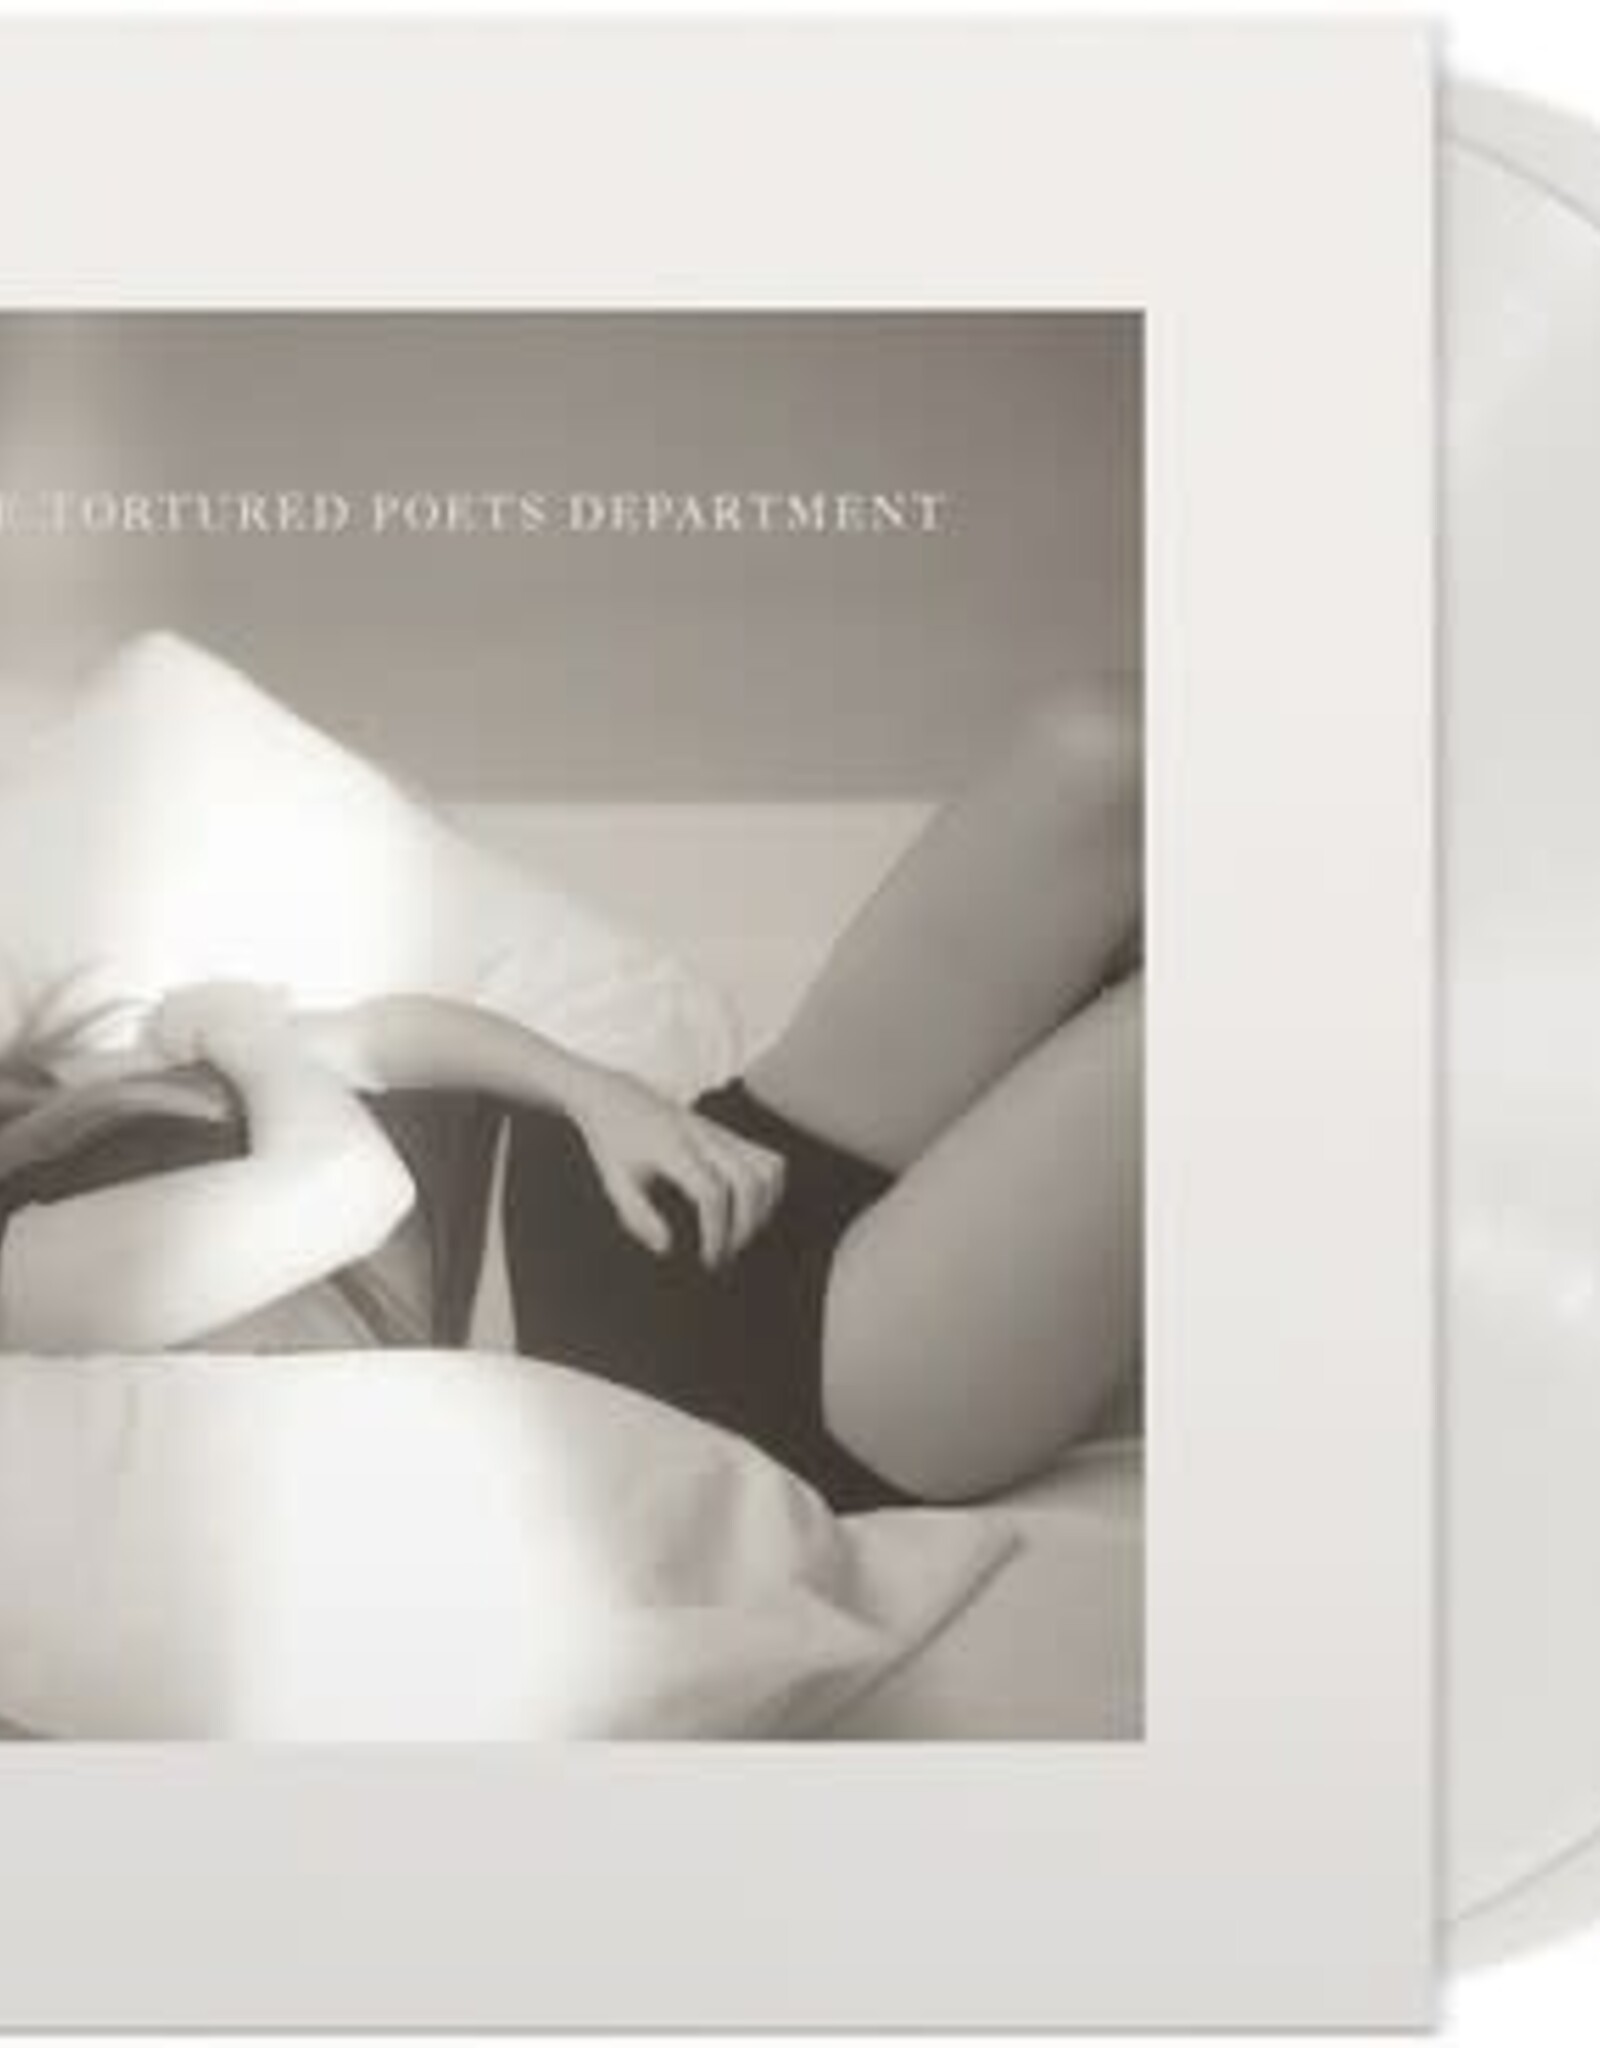 Taylor Swift -The Tortured Poets Department [Ghosted White Vinyl]